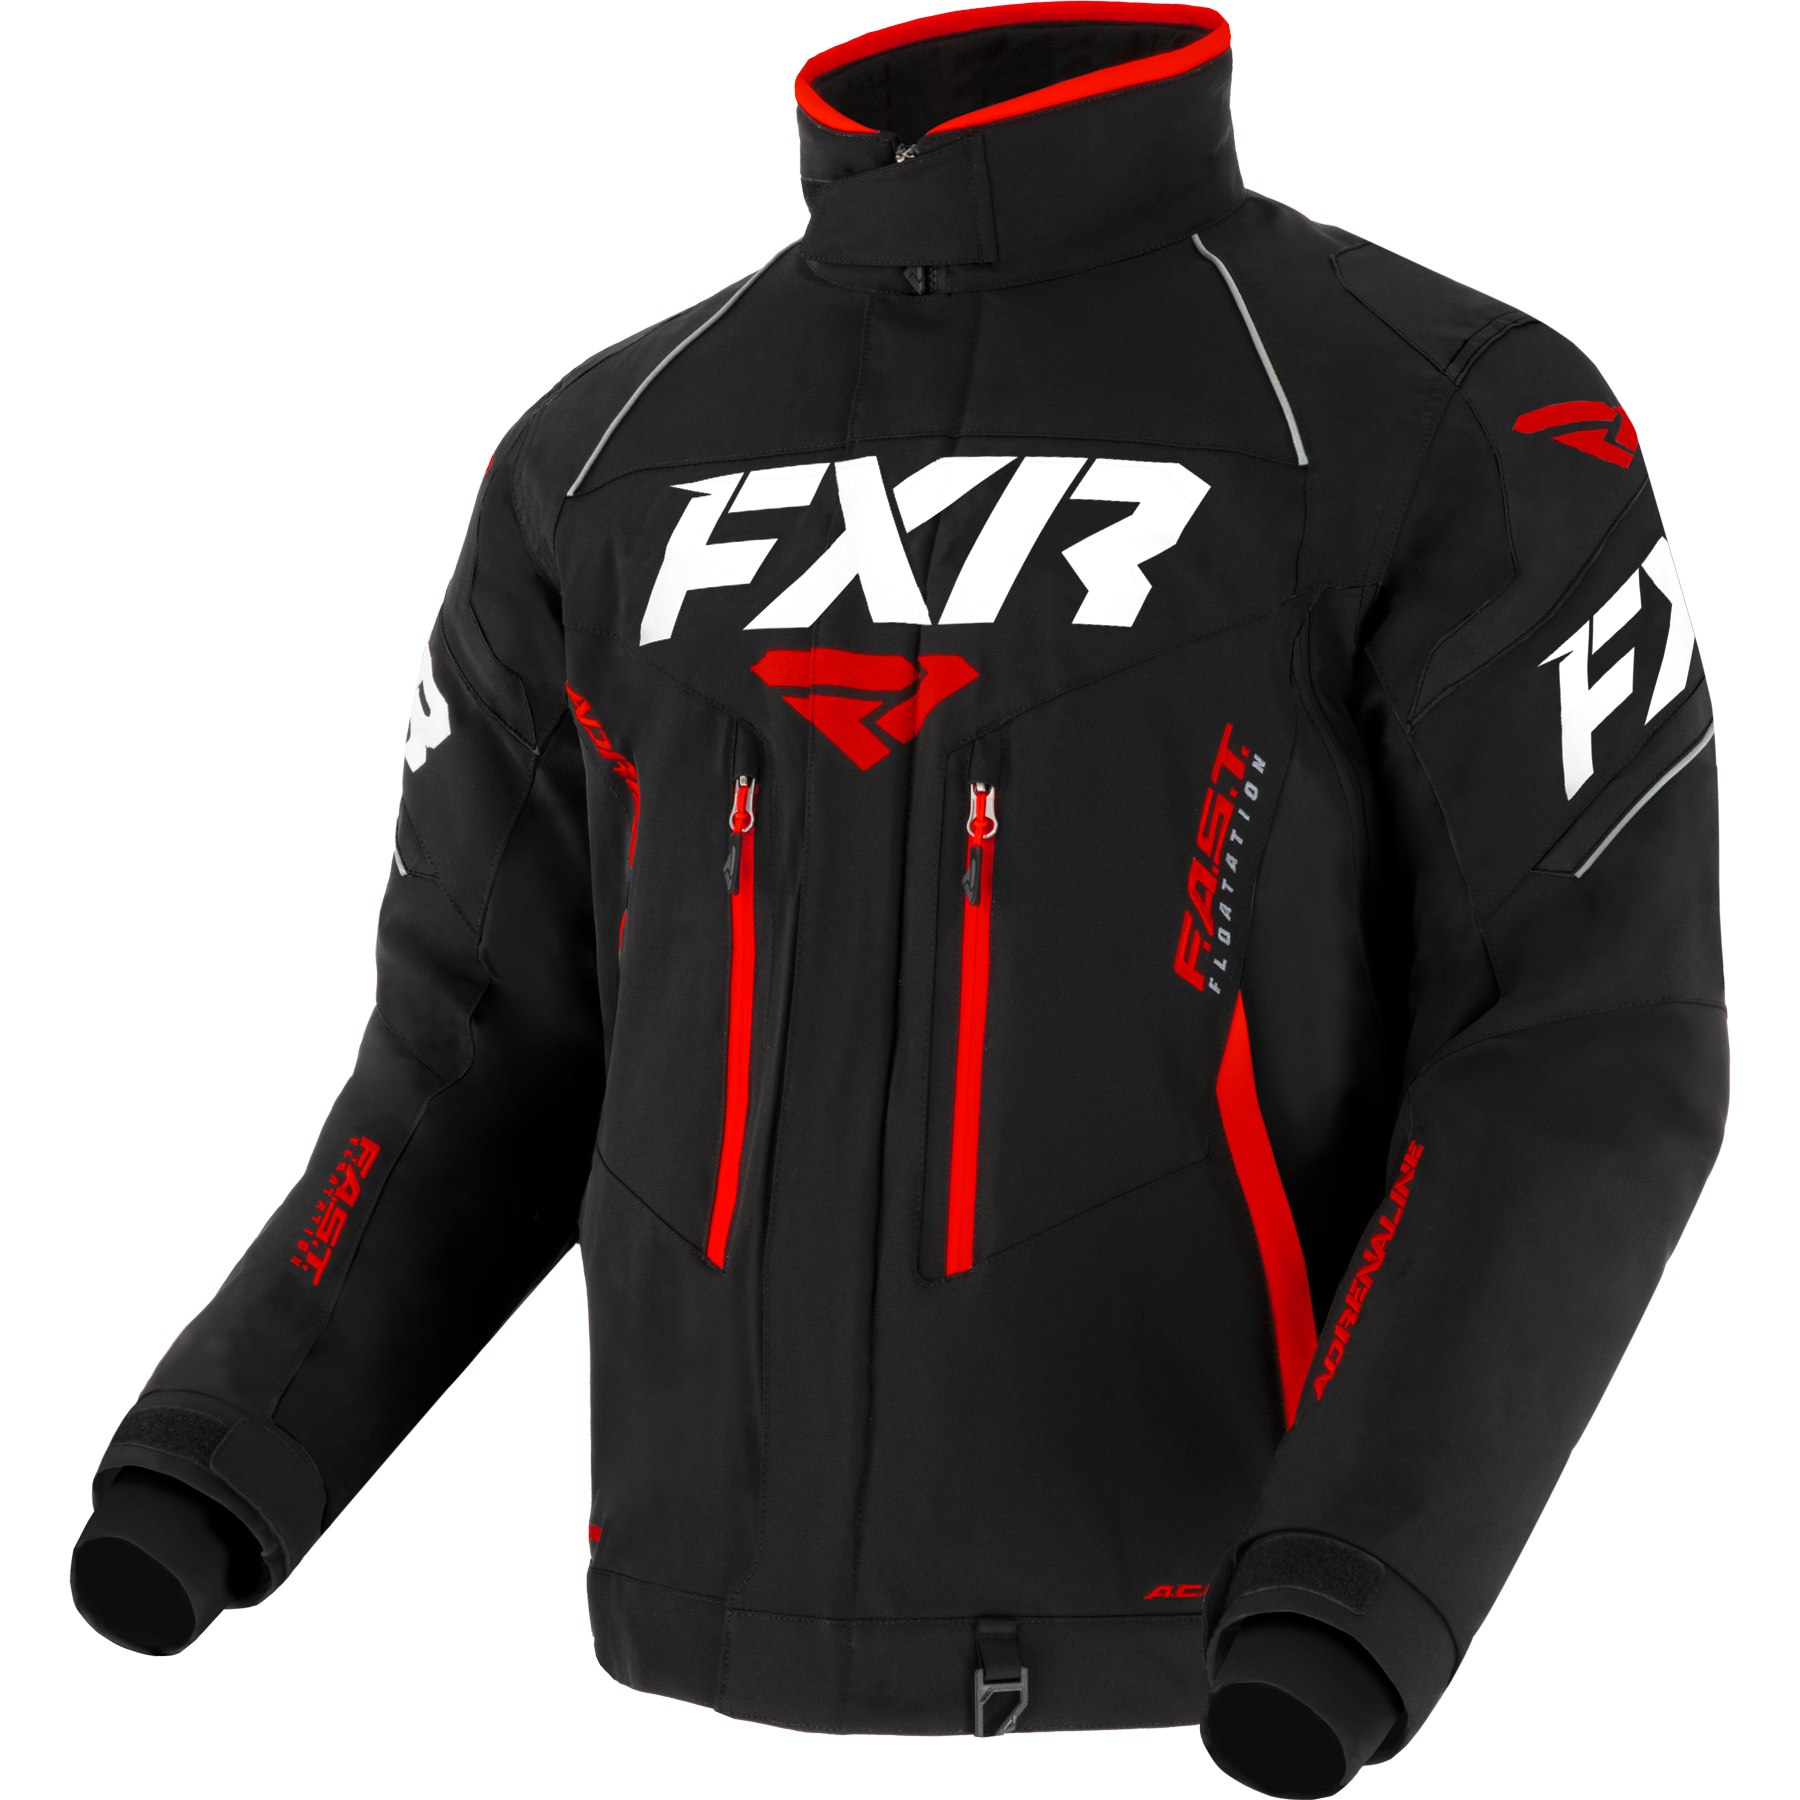 fxr racing insulated jackets for men adrenaline fast